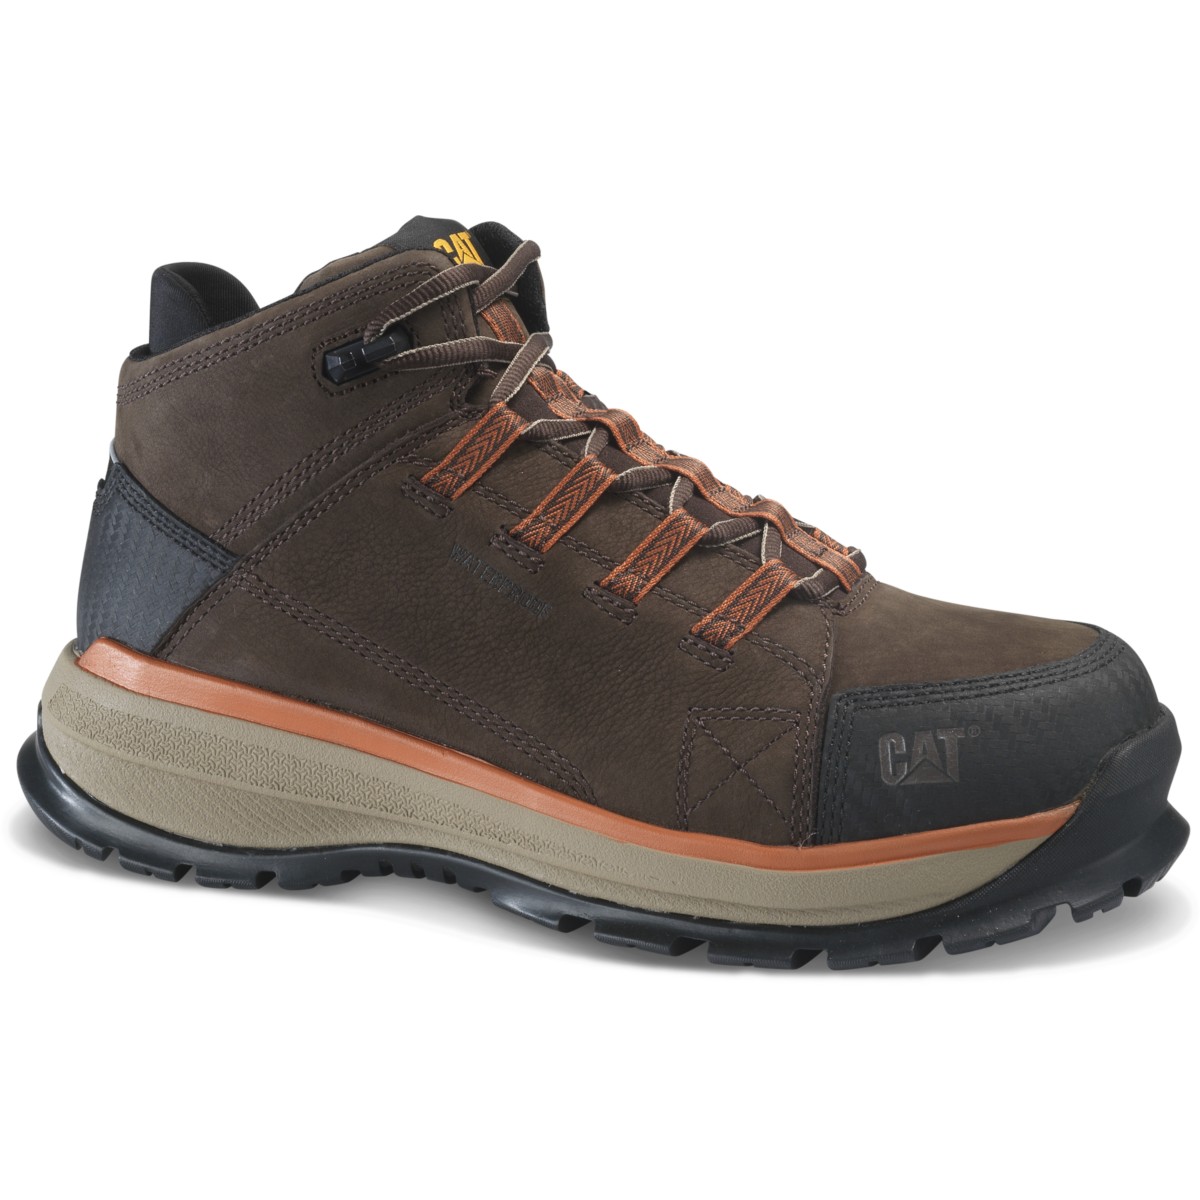 cat safety shoes online